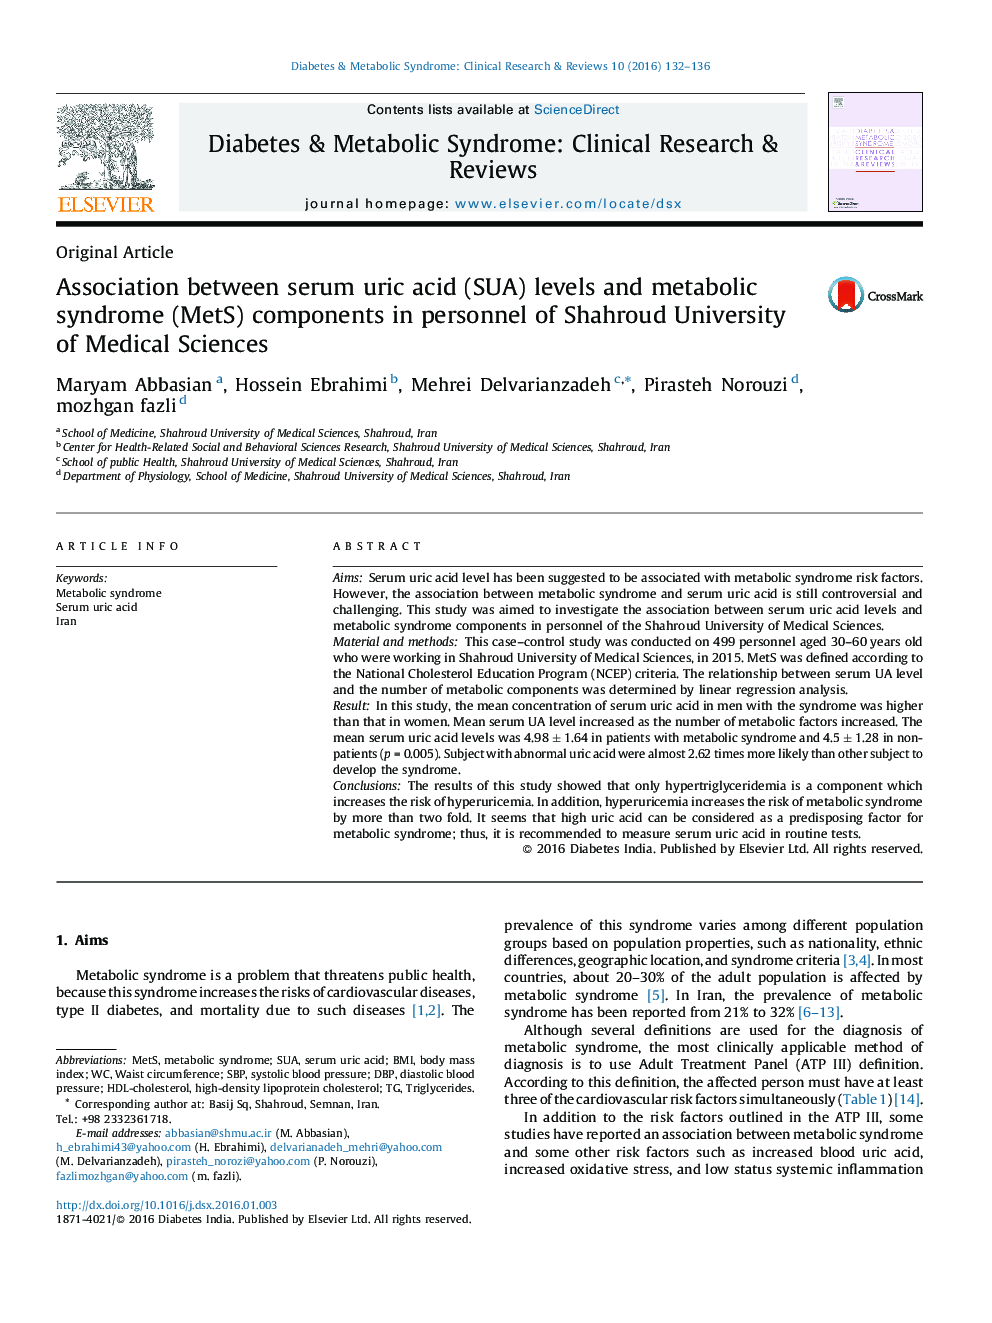 Association between serum uric acid (SUA) levels and metabolic syndrome (MetS) components in personnel of Shahroud University of Medical Sciences